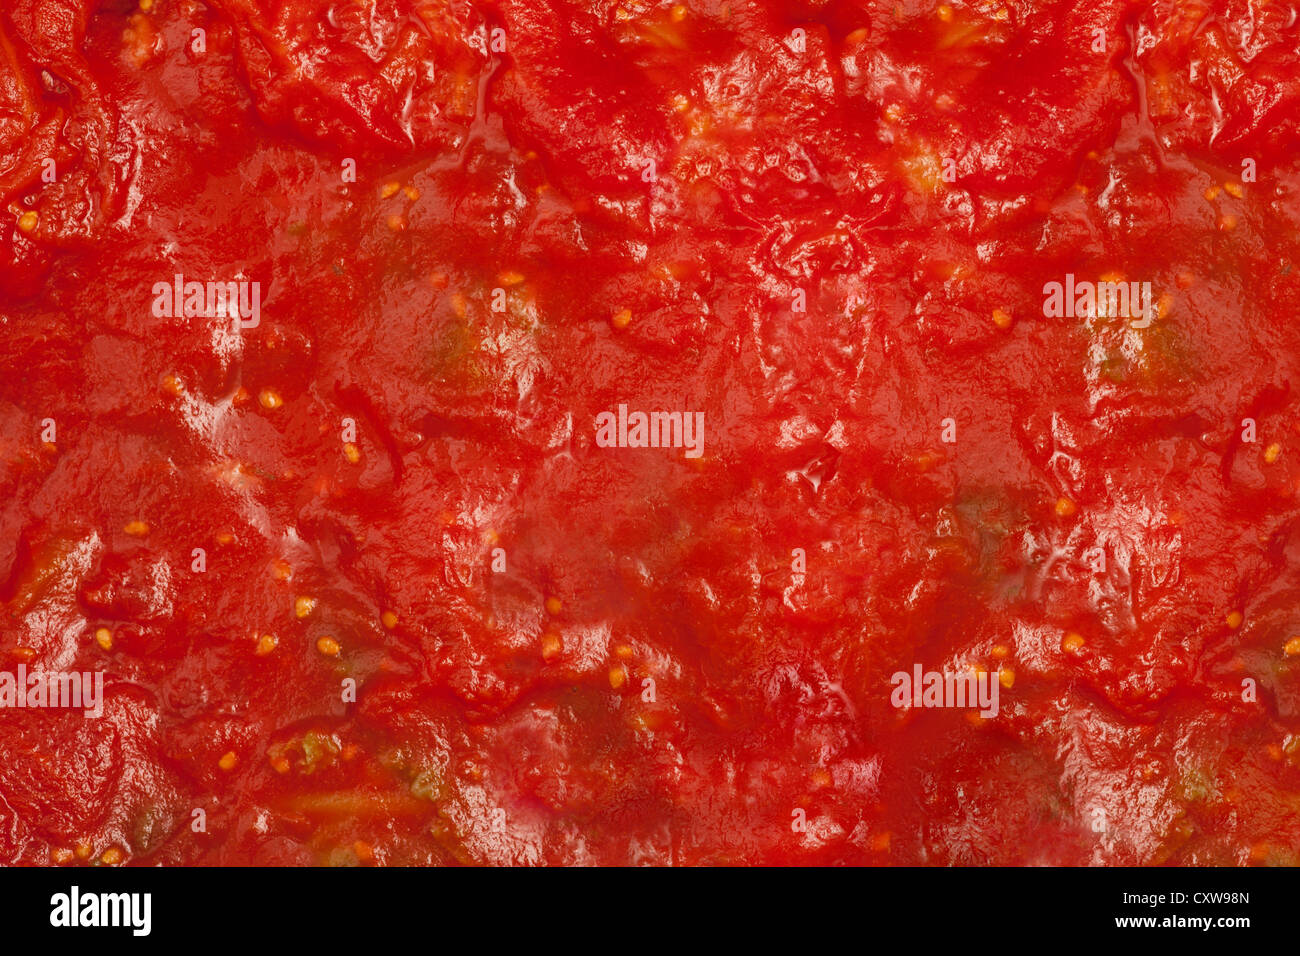 tomato sauce background, red food rough texture Stock Photo